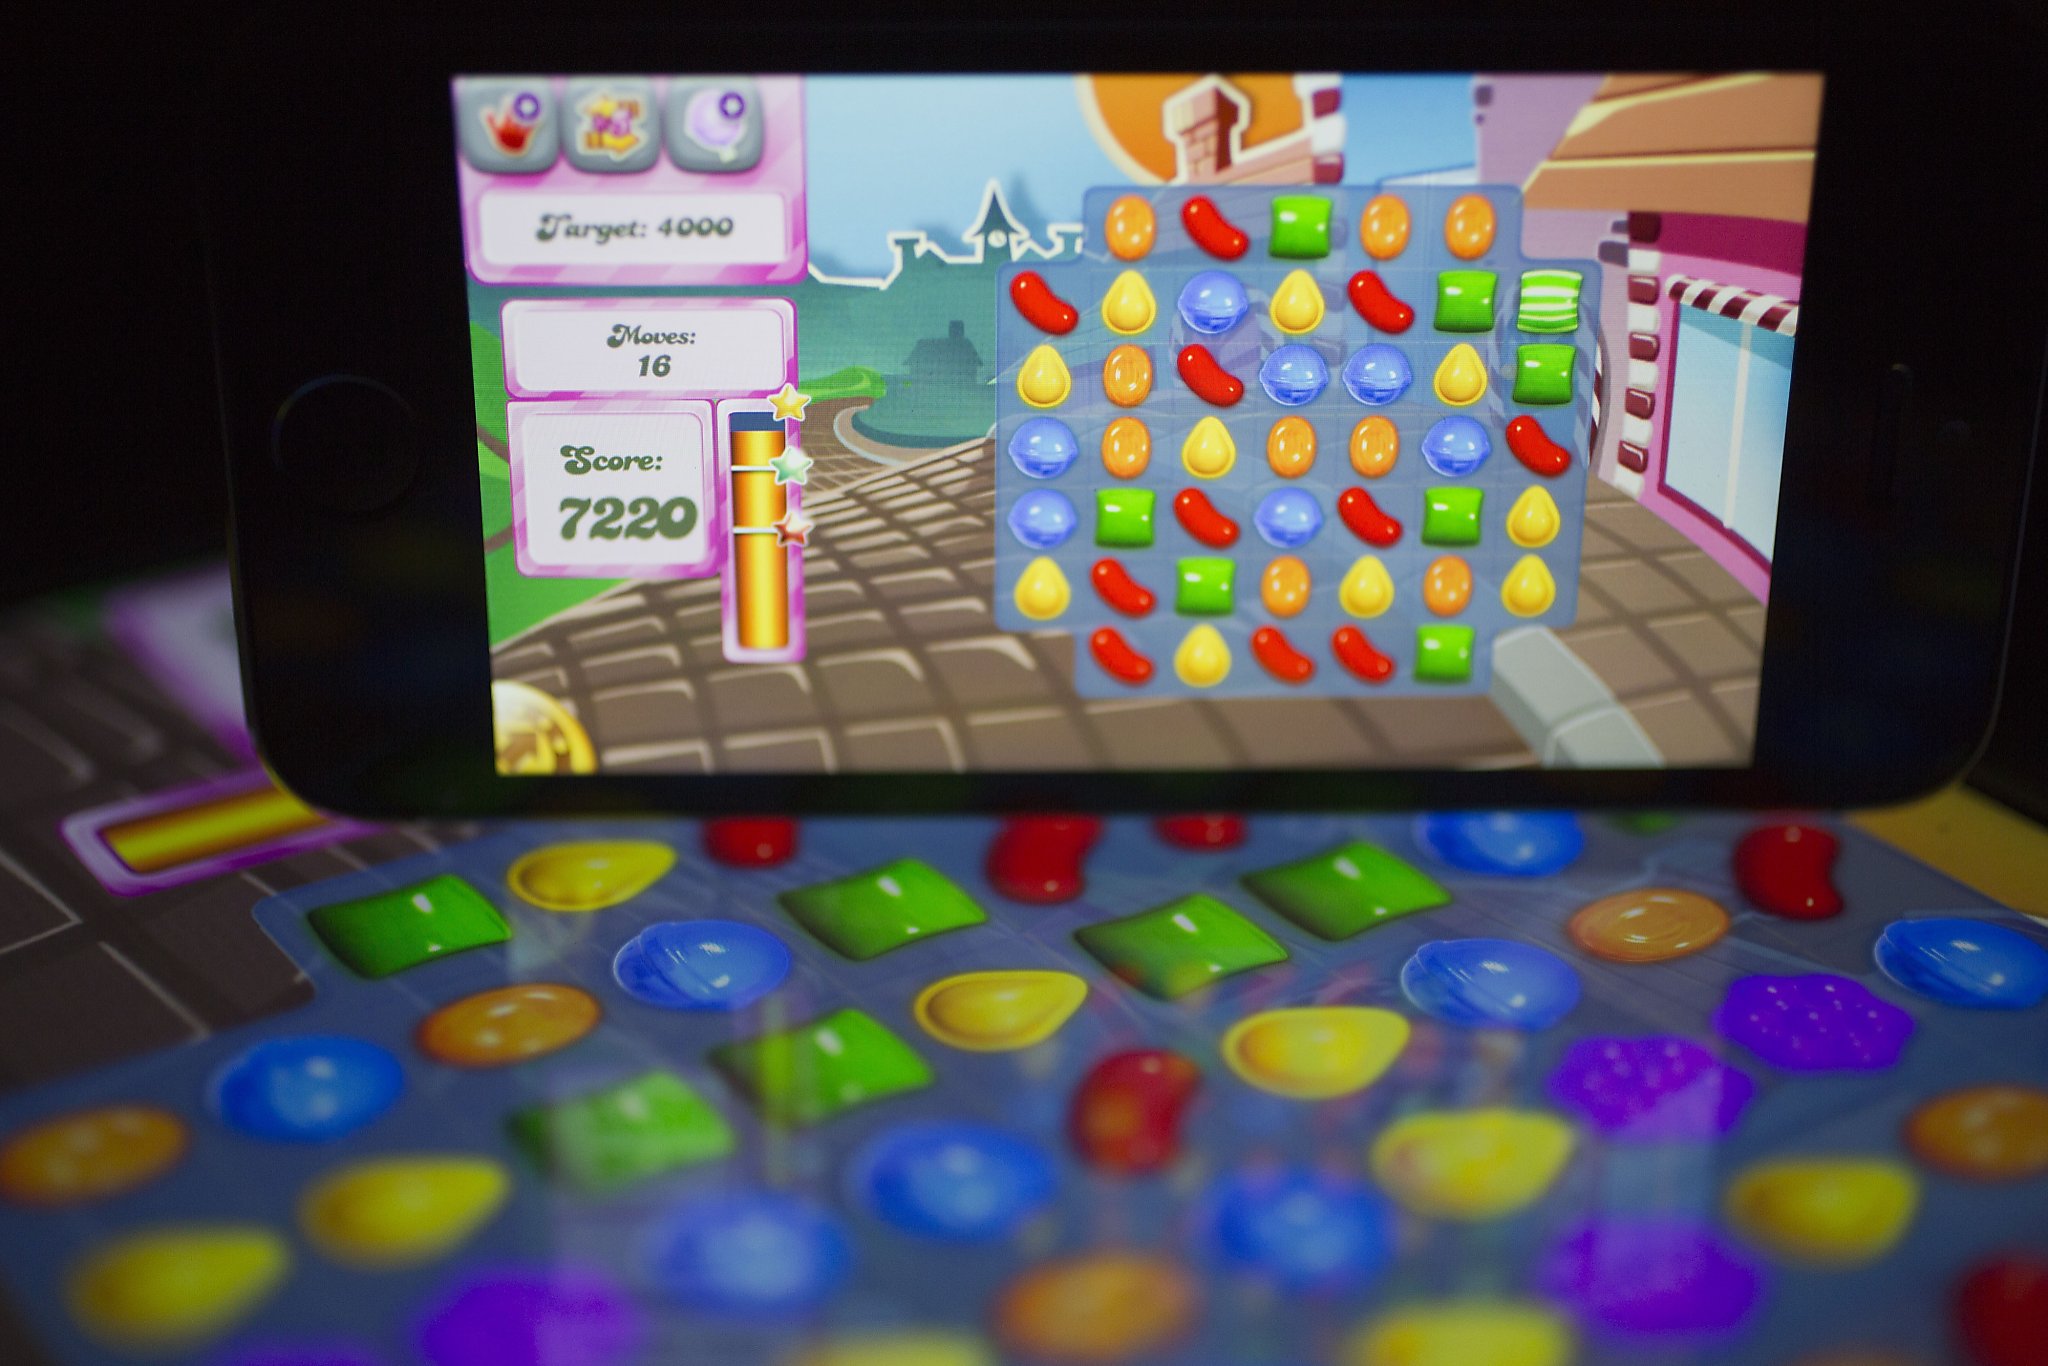 Candy Crush Saga maker King's parent company reveals 2012 financial results, Apps